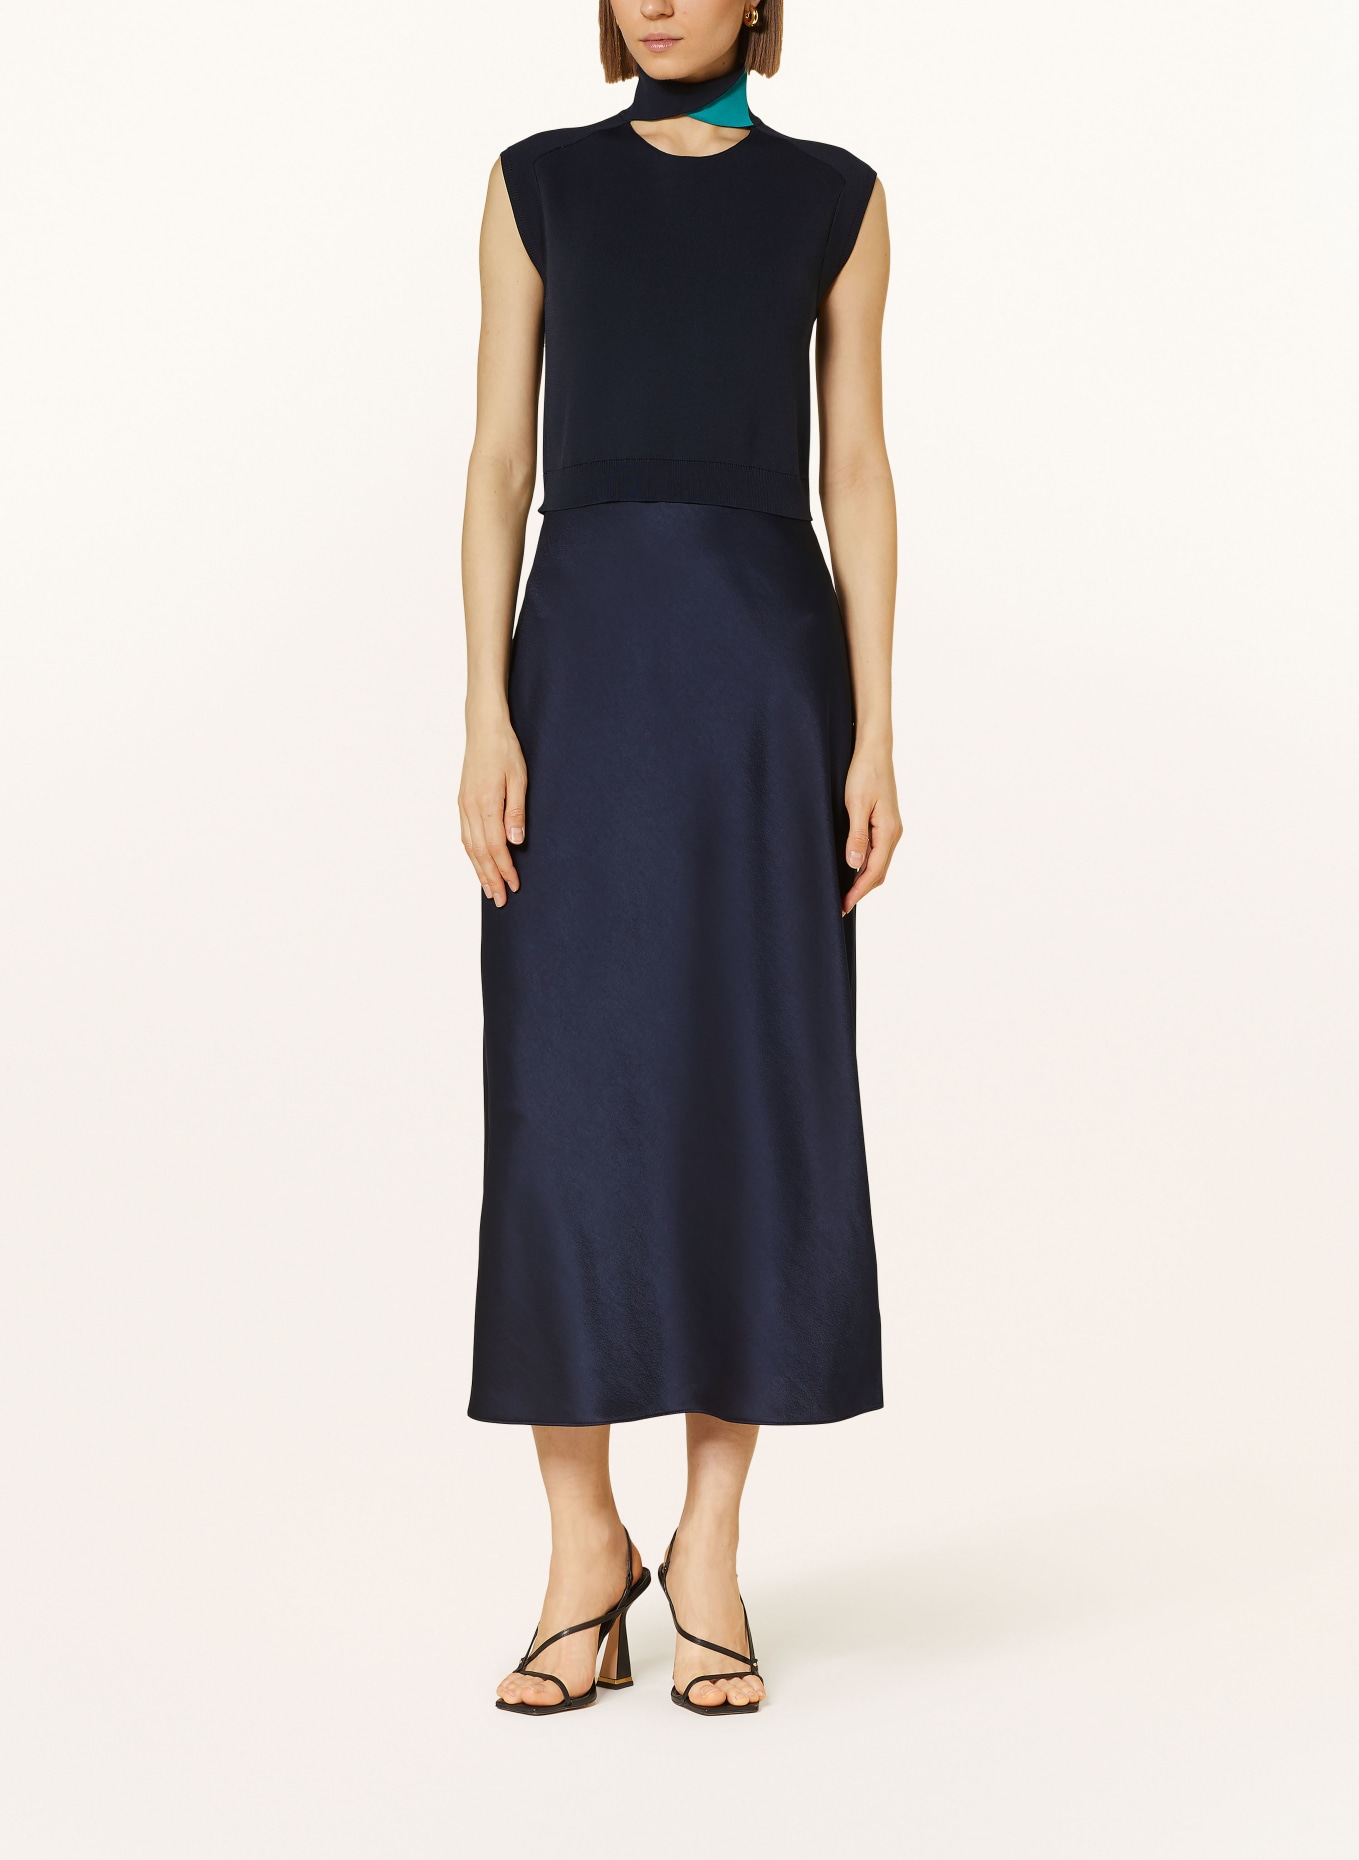 TED BAKER Kleid PAOLLA im Materialmix mit Cut-out, Farbe: DUNKELBLAU (Bild 2)